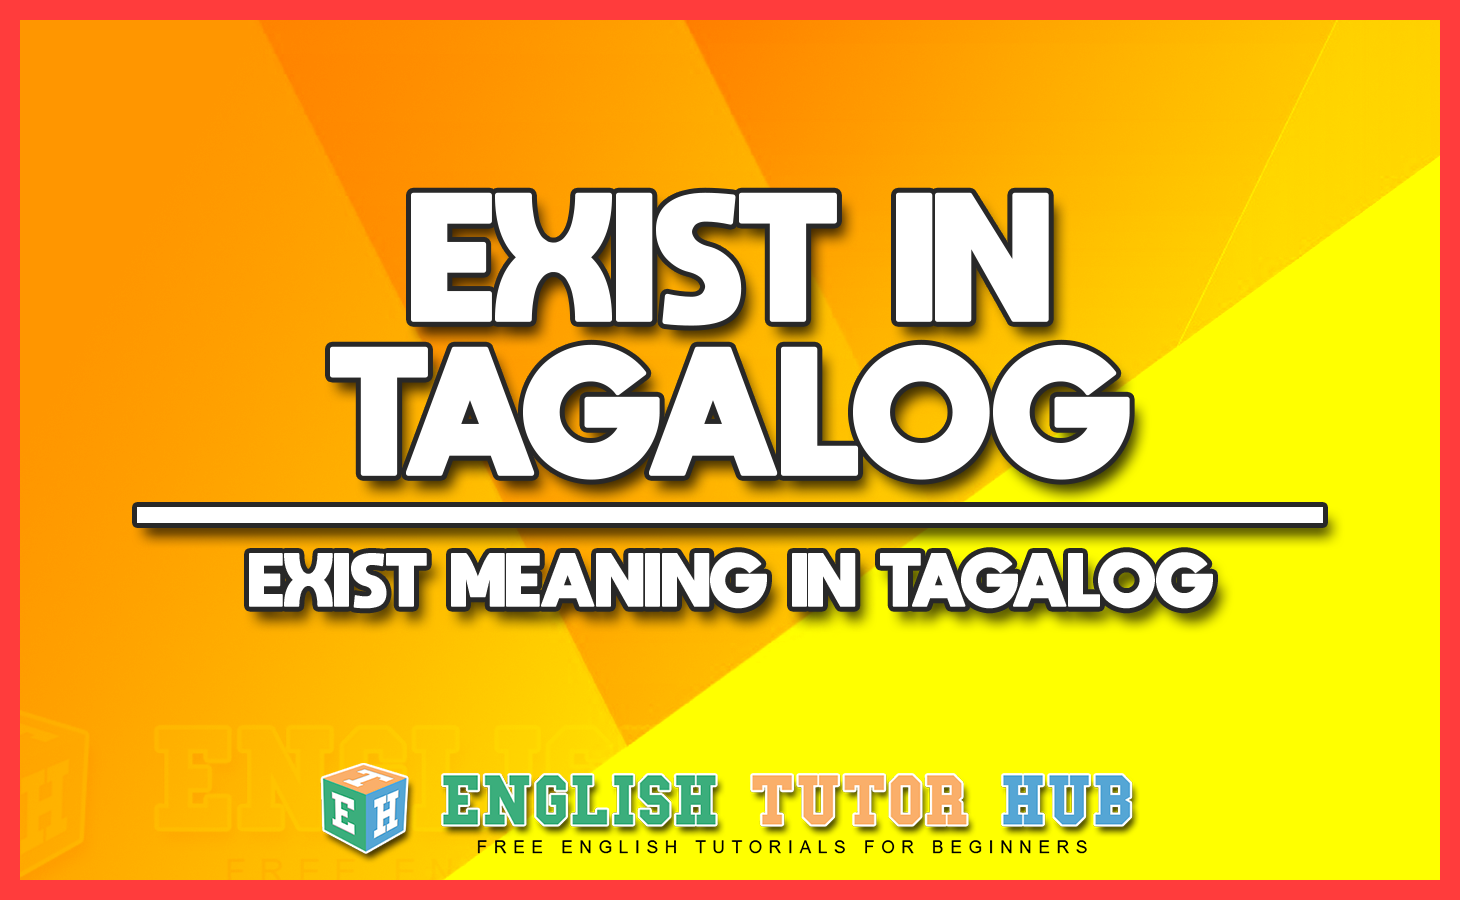 EXIST IN TAGALOG - EXIST MEANING IN TAGALOG